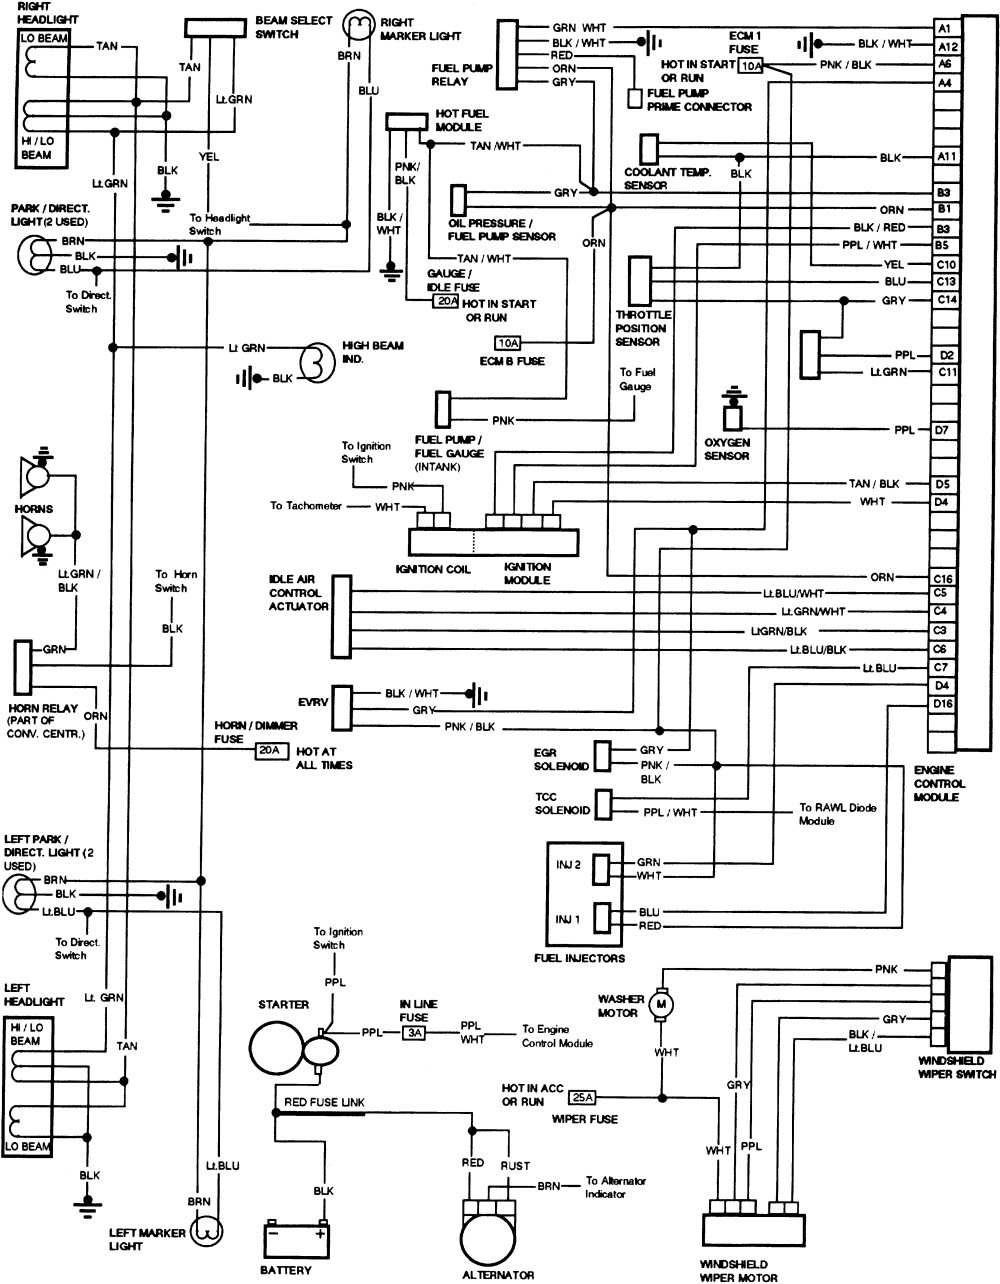 I Need Chevrolet P30 Chassis Wiring Diagrams Which I Expected To Be 7 4 454 Chevy Motorhome Wiring Diagram Chevy P30 Wiring Diagram